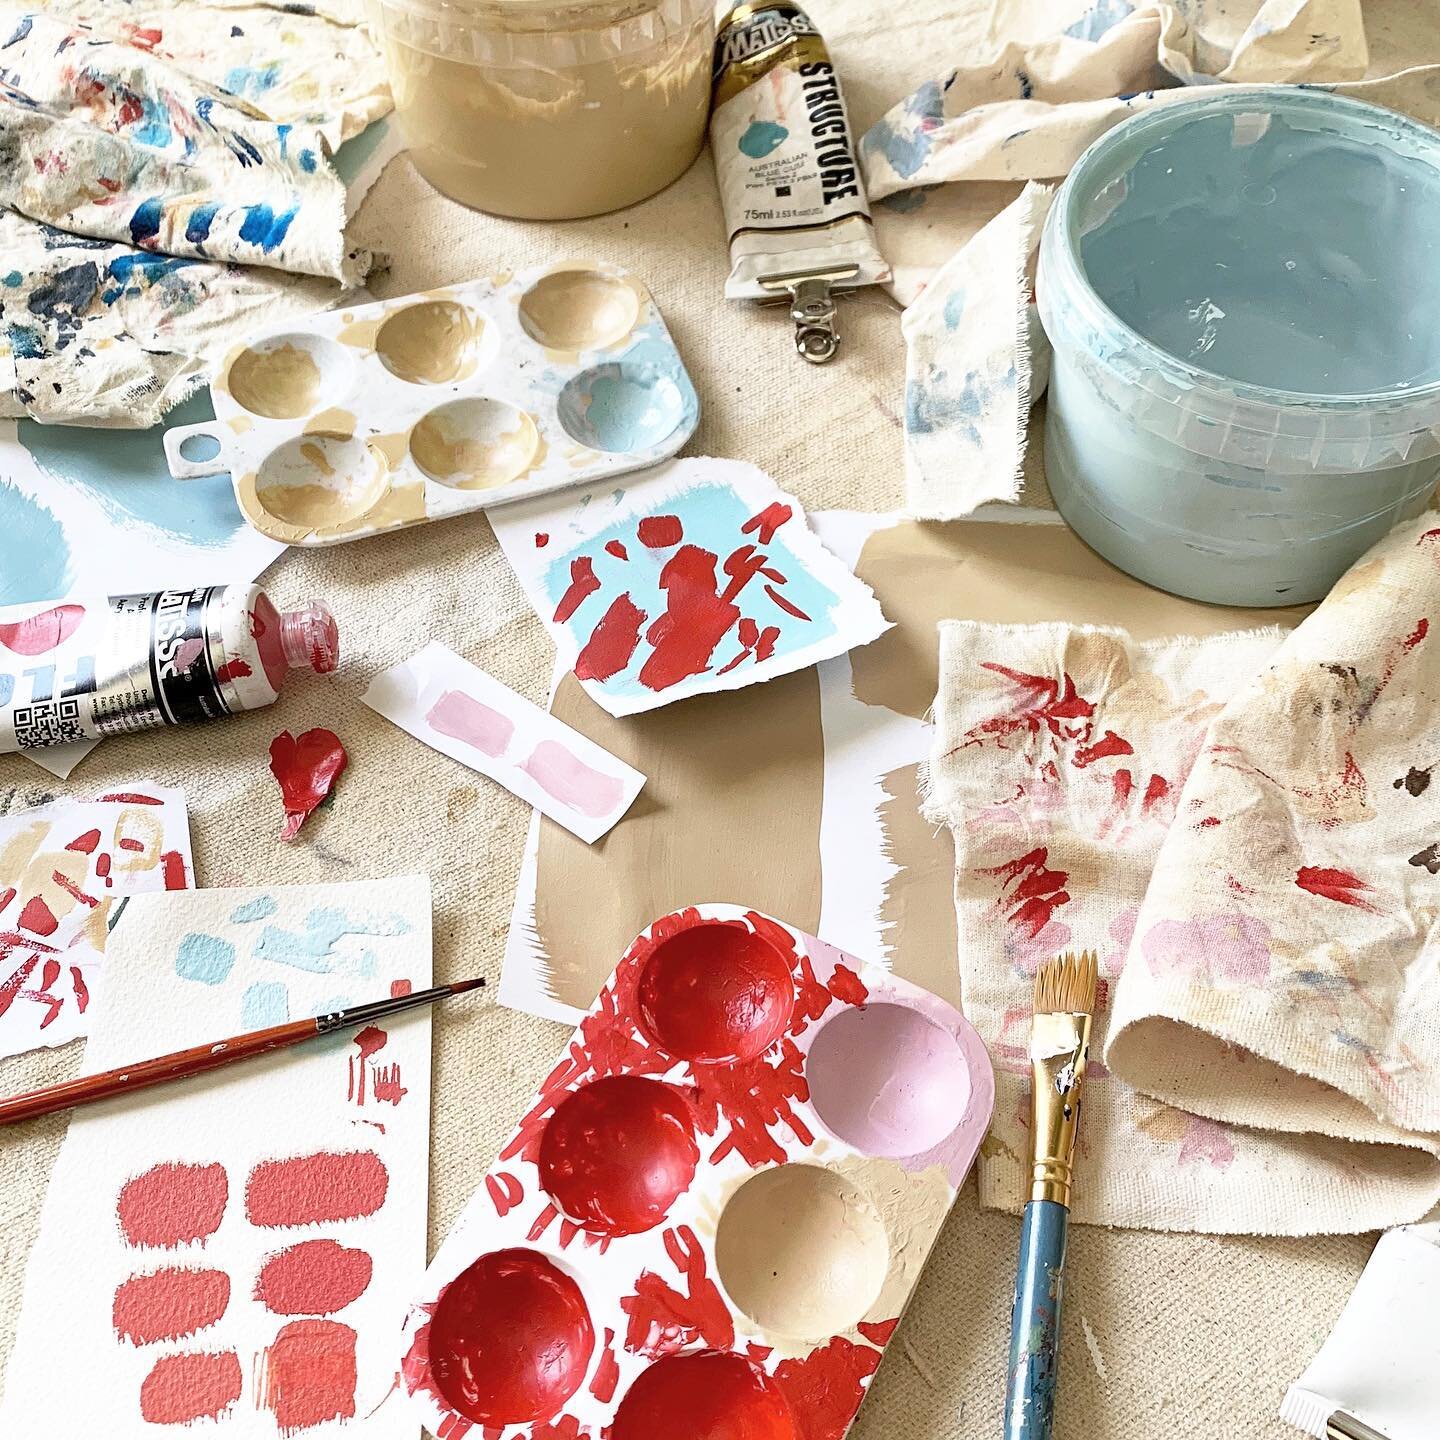 PRETTY. MESSES. 
Working on some new little paintings that will be available soon in the online store. Here&rsquo;s some of the pretty mess that&rsquo;s taking over the studio as they come to life.